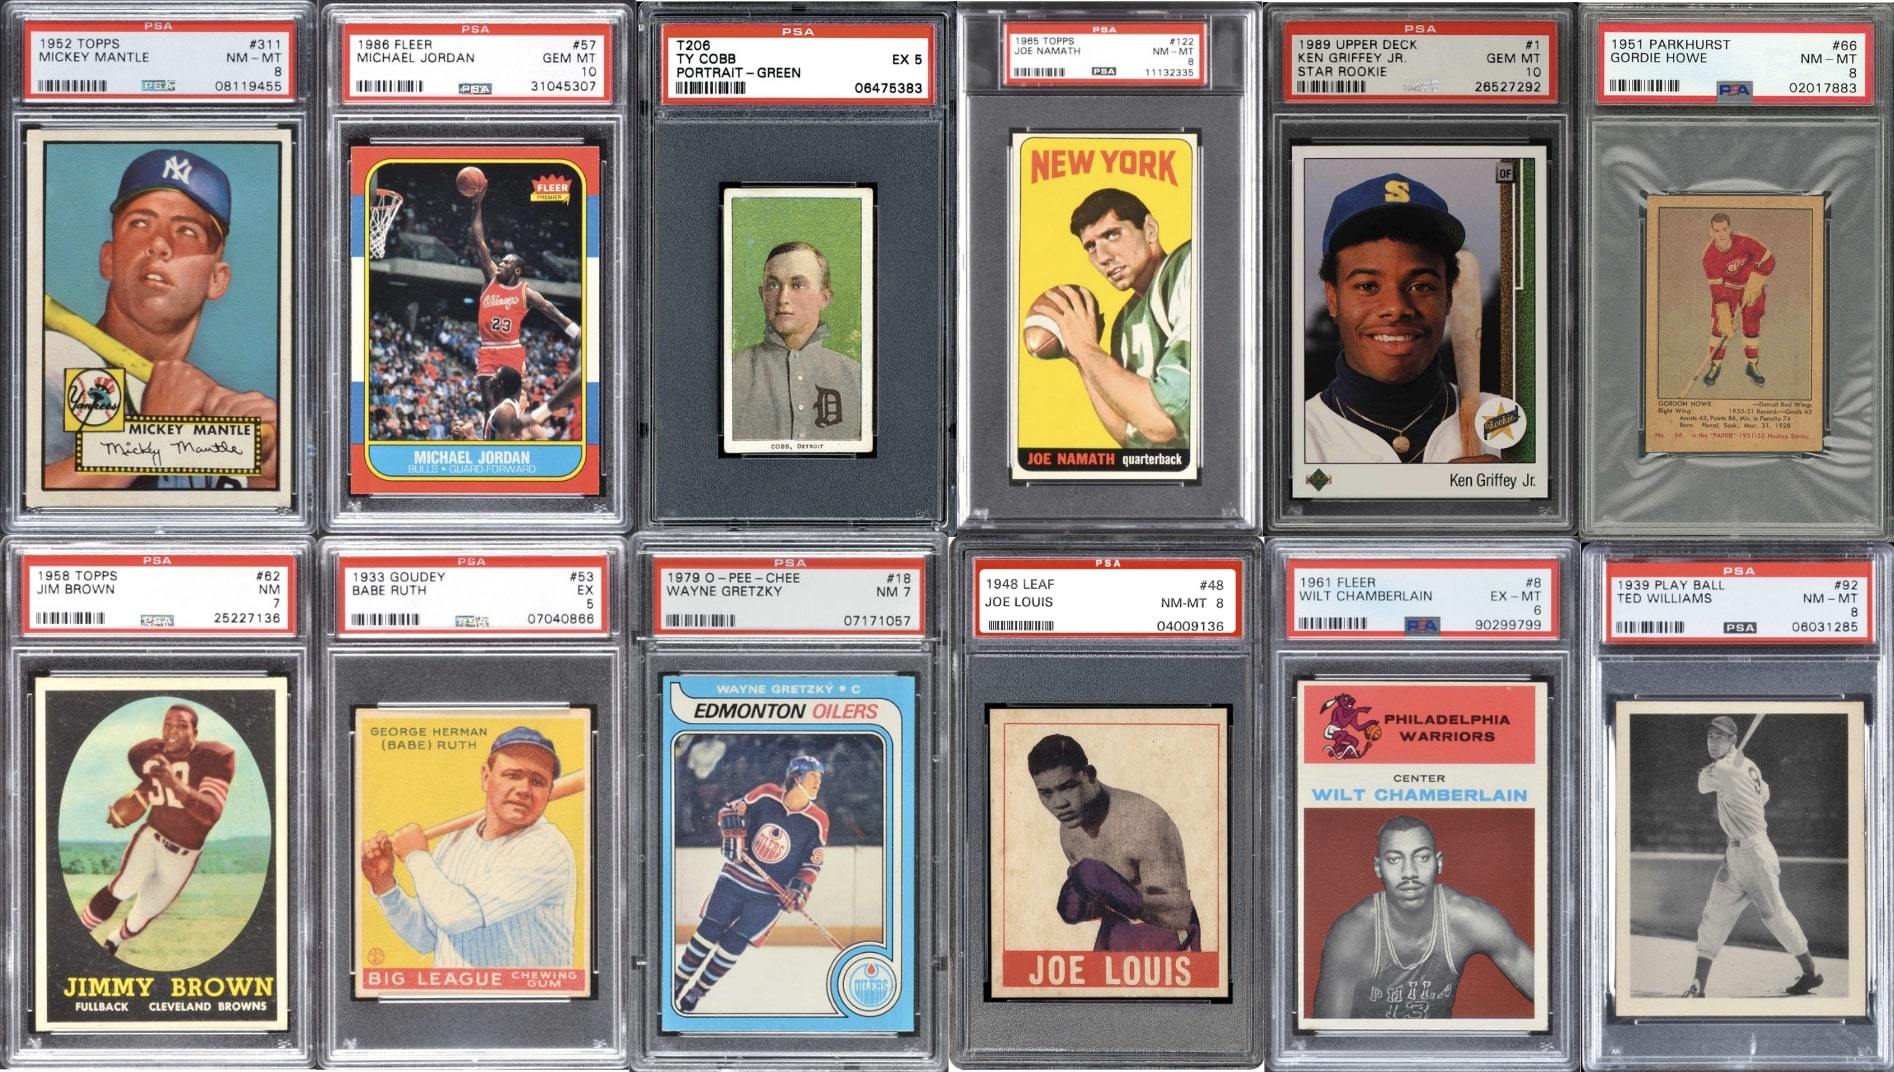 Ten Famous Sports Cards Graded by PSA Grading Services